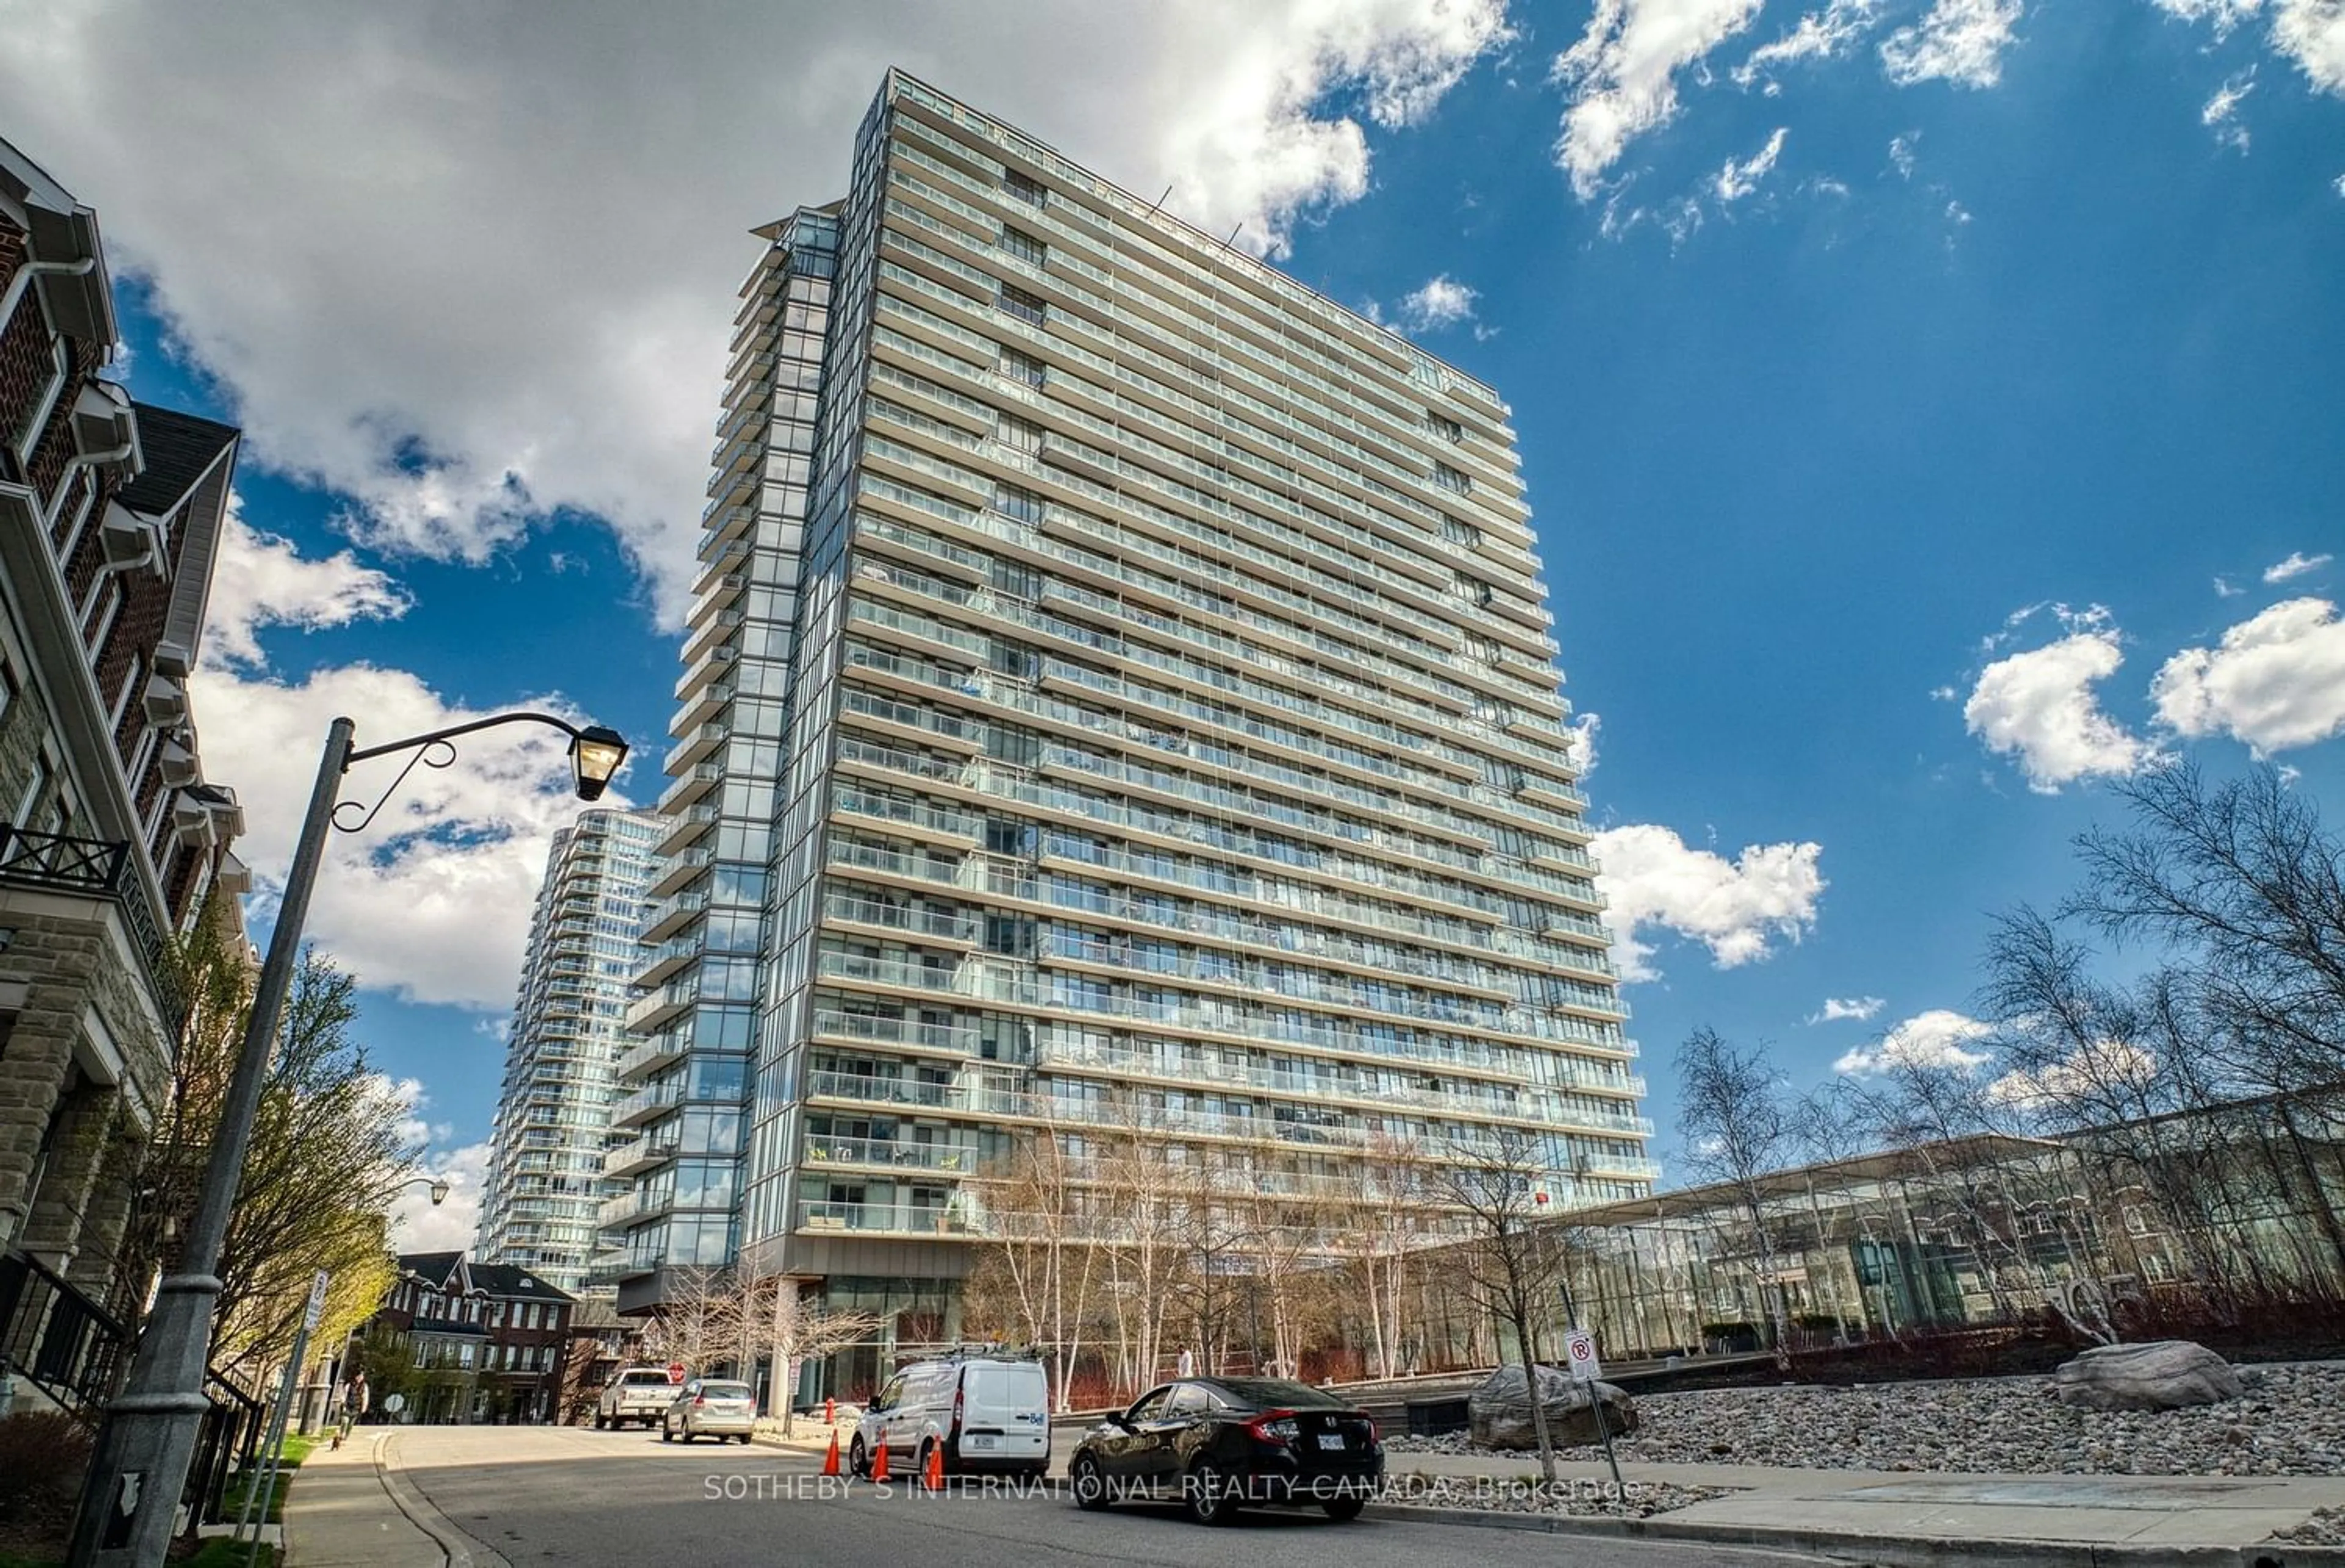 A pic from exterior of the house or condo for 103 The Queensway #303, Toronto Ontario M6S 5B3